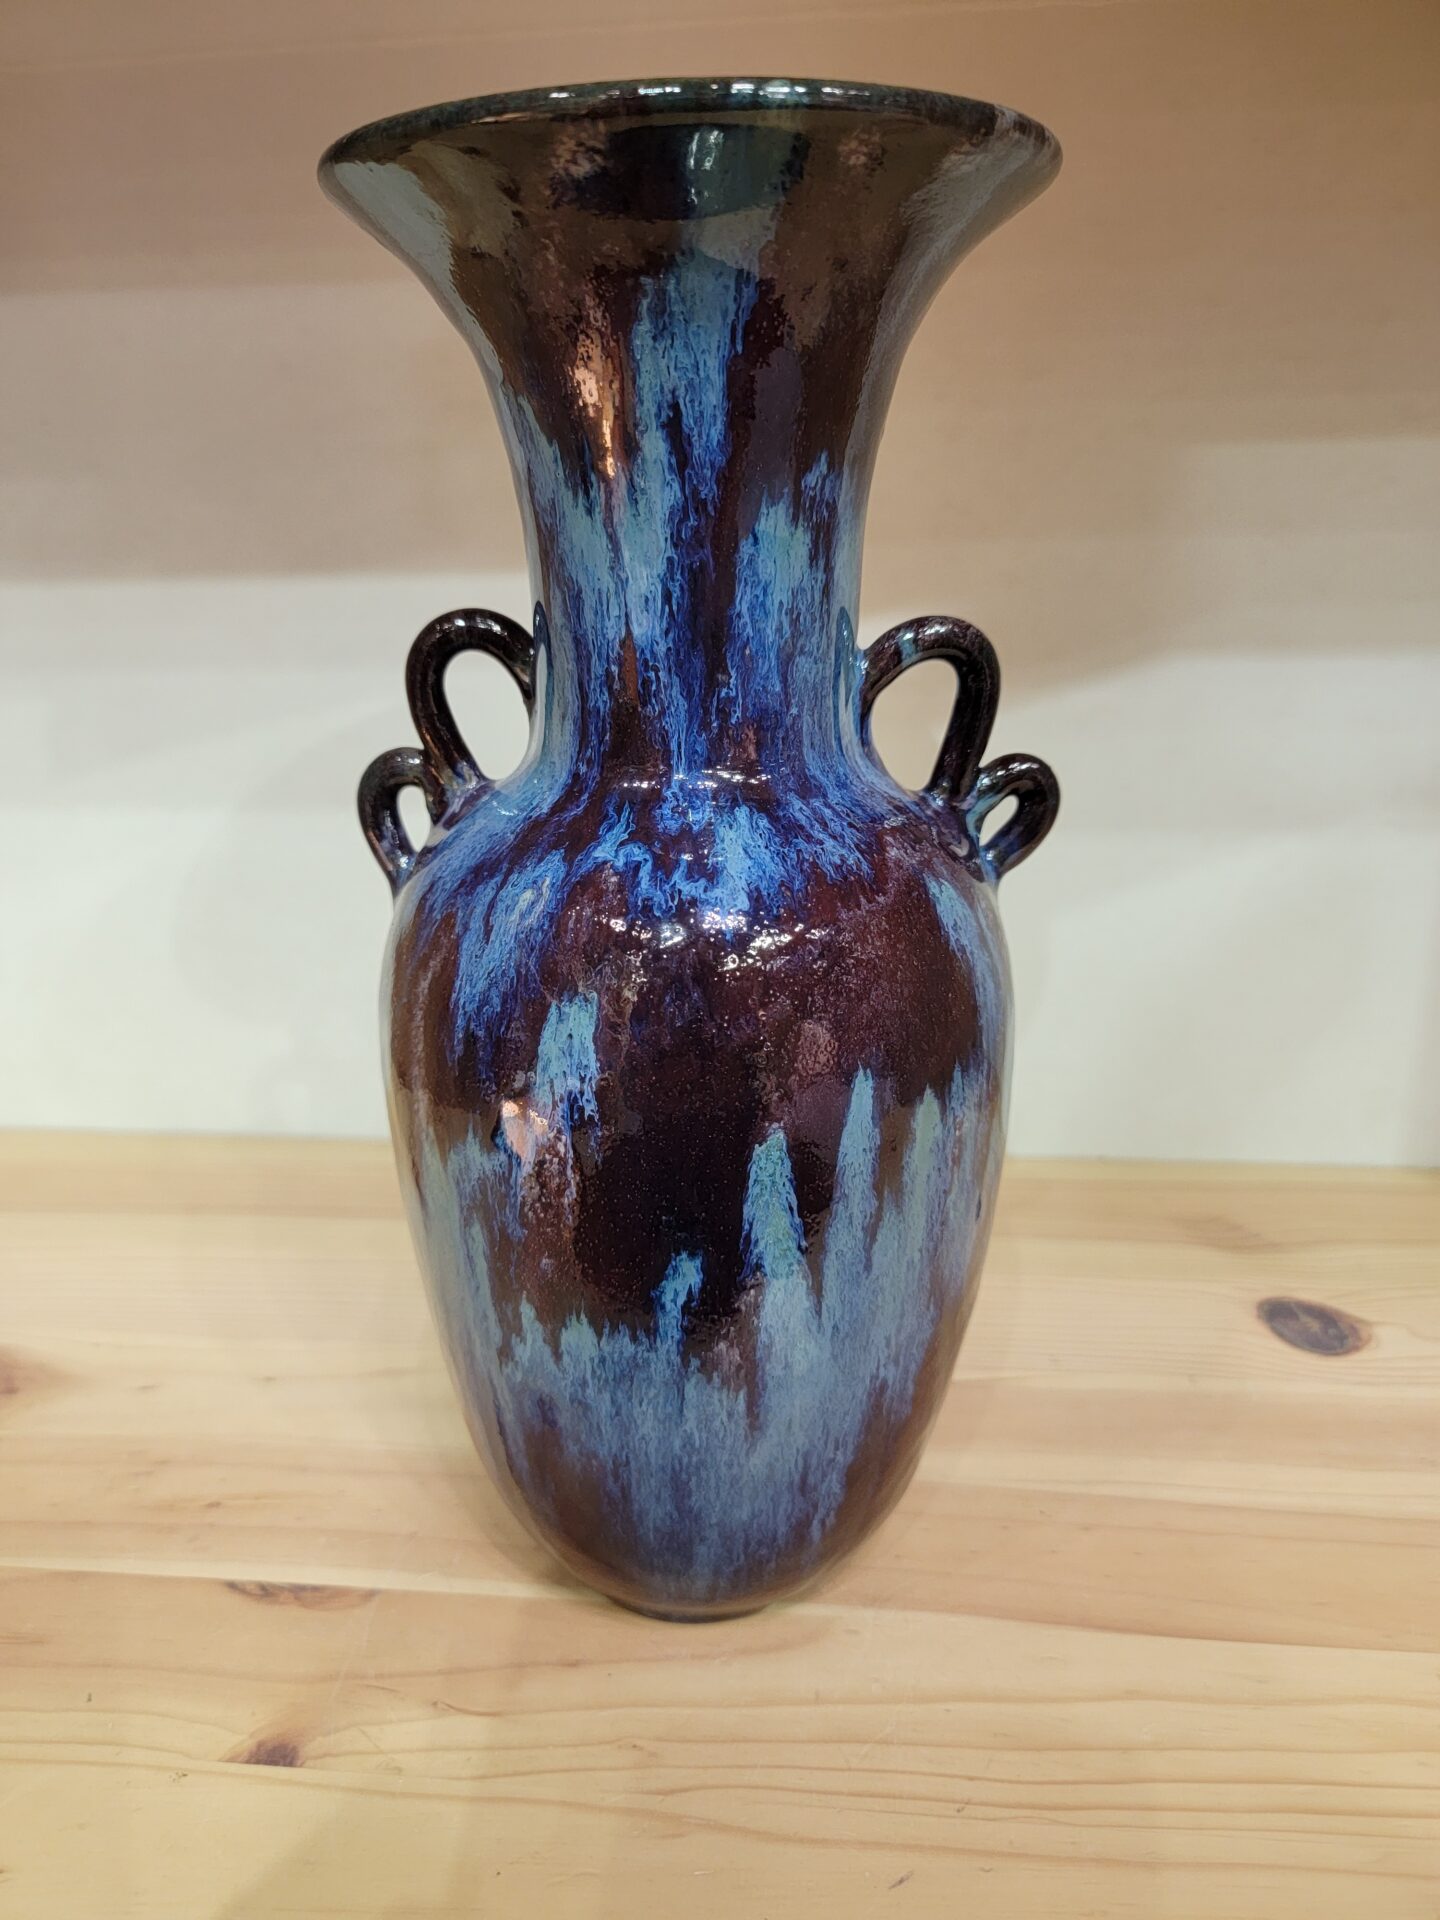 A blue and brown vase sitting on top of a wooden table.